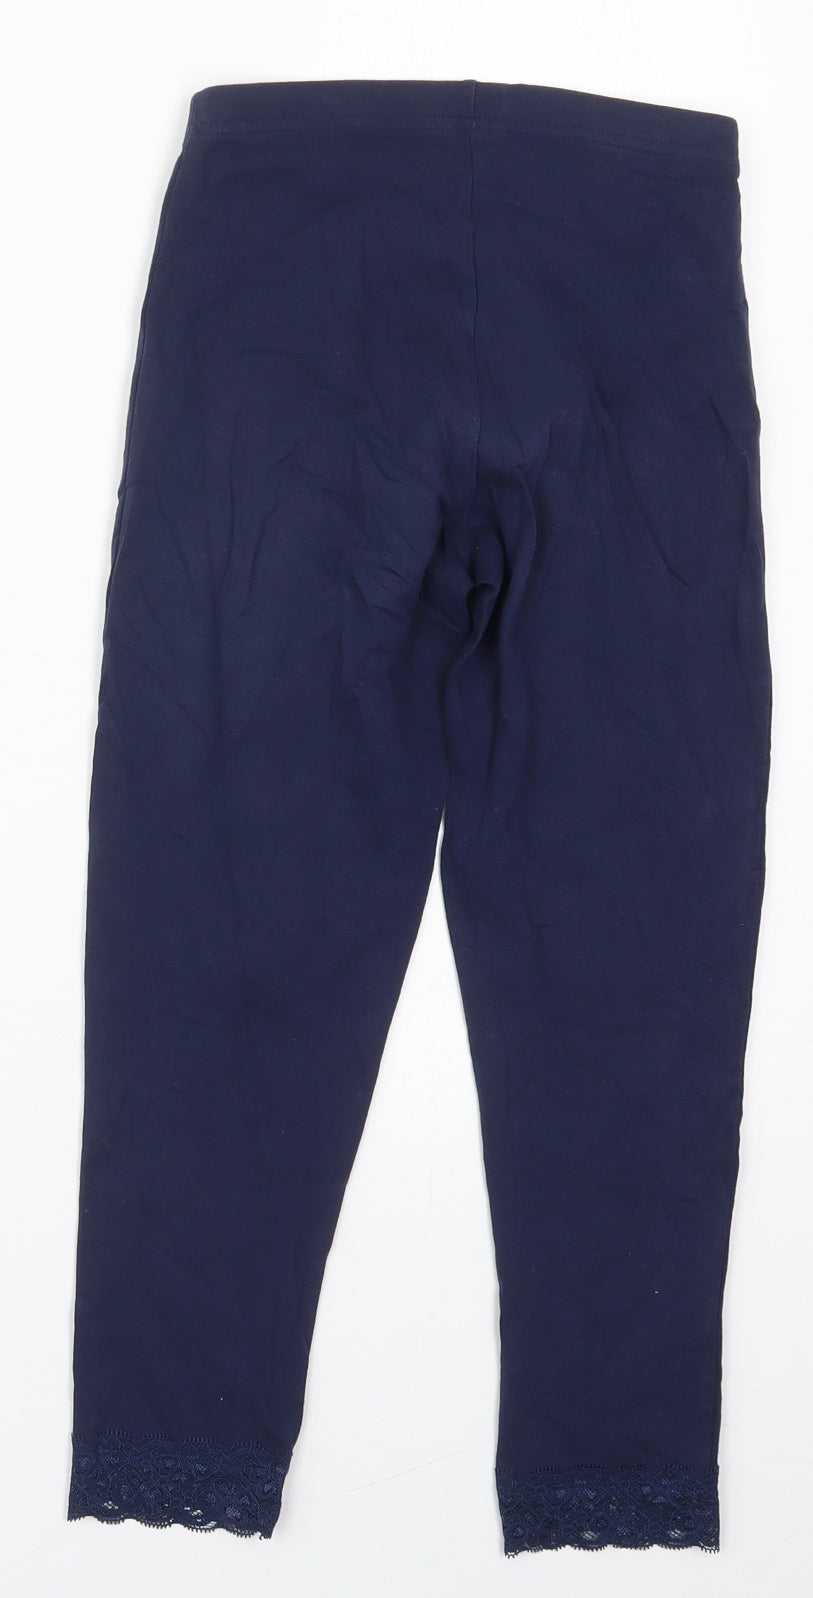 George Womens Blue  Cotton Carrot Leggings Size 8 L21 in